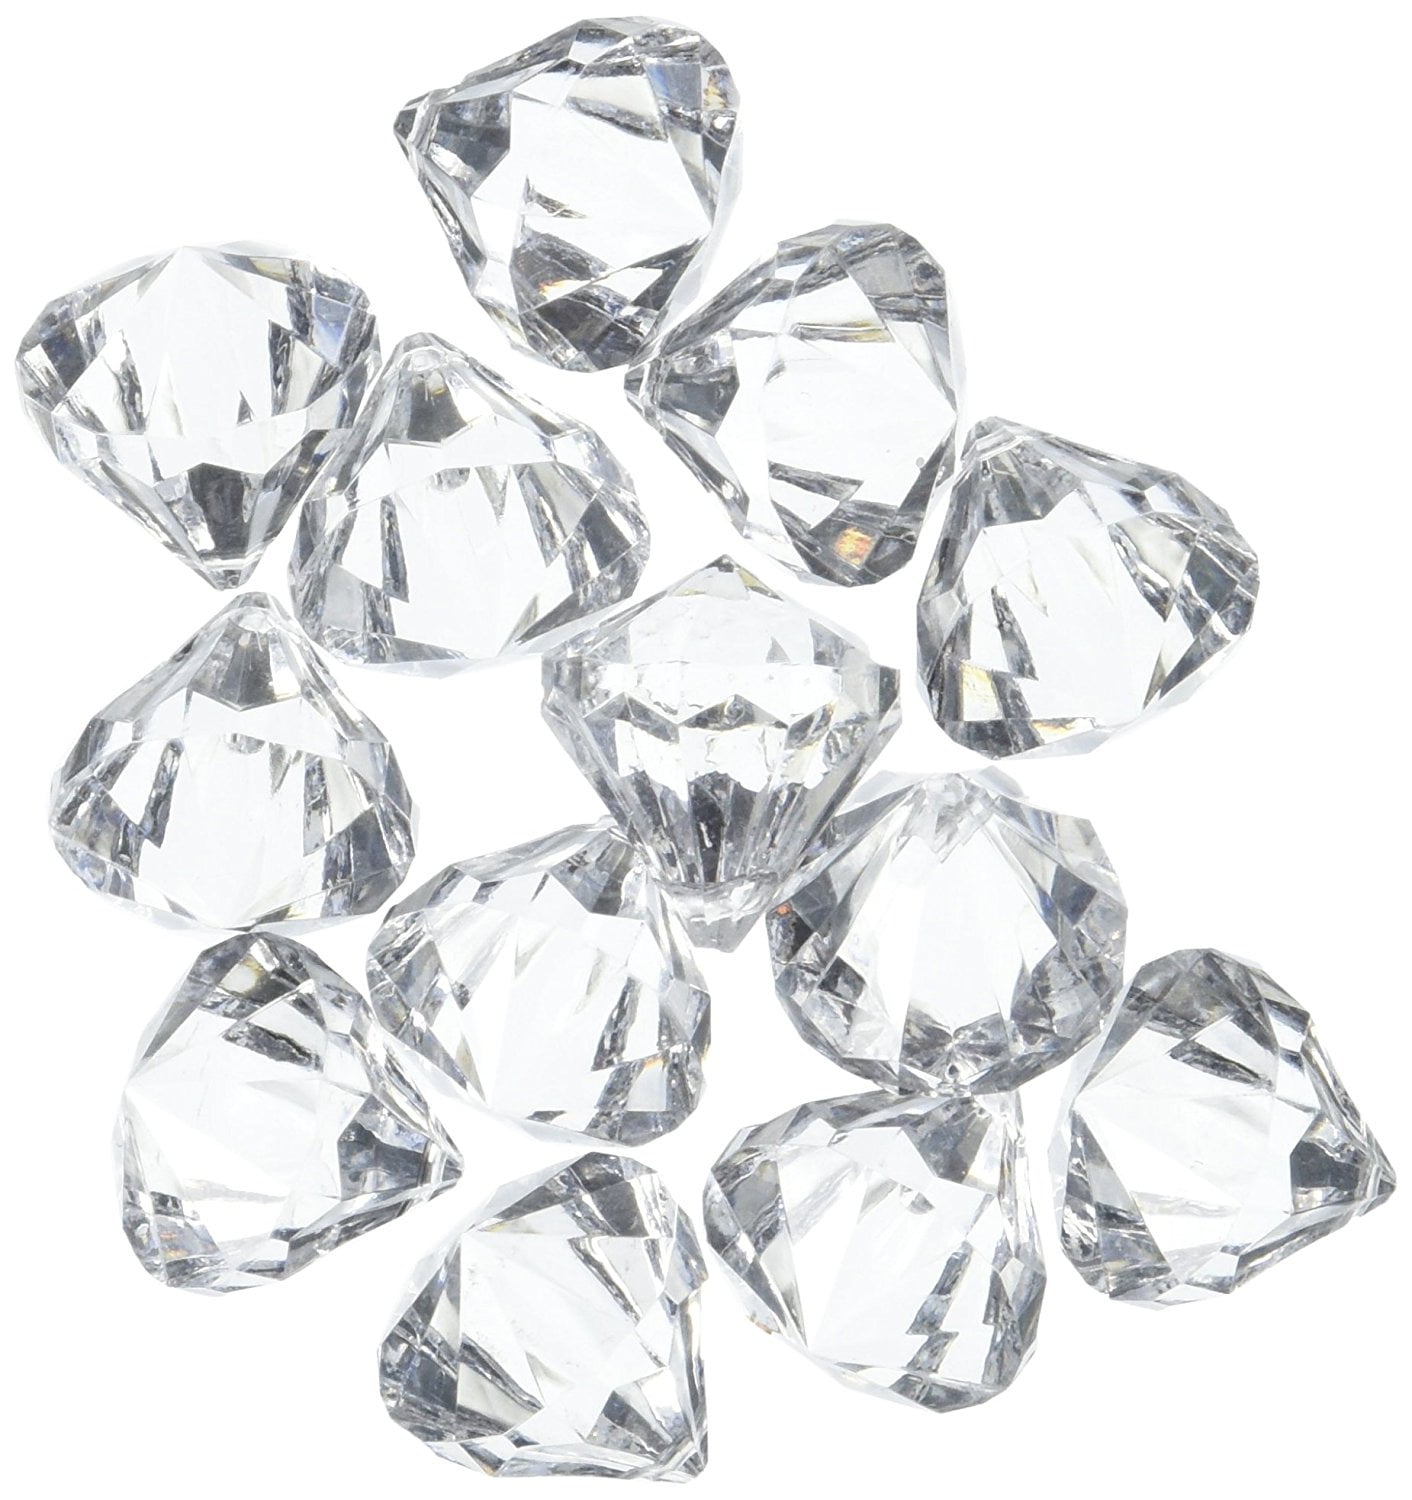 10lb Clear Acrylic Diamond Shaped Gems Wedding Table Scatter Venue Decorations 